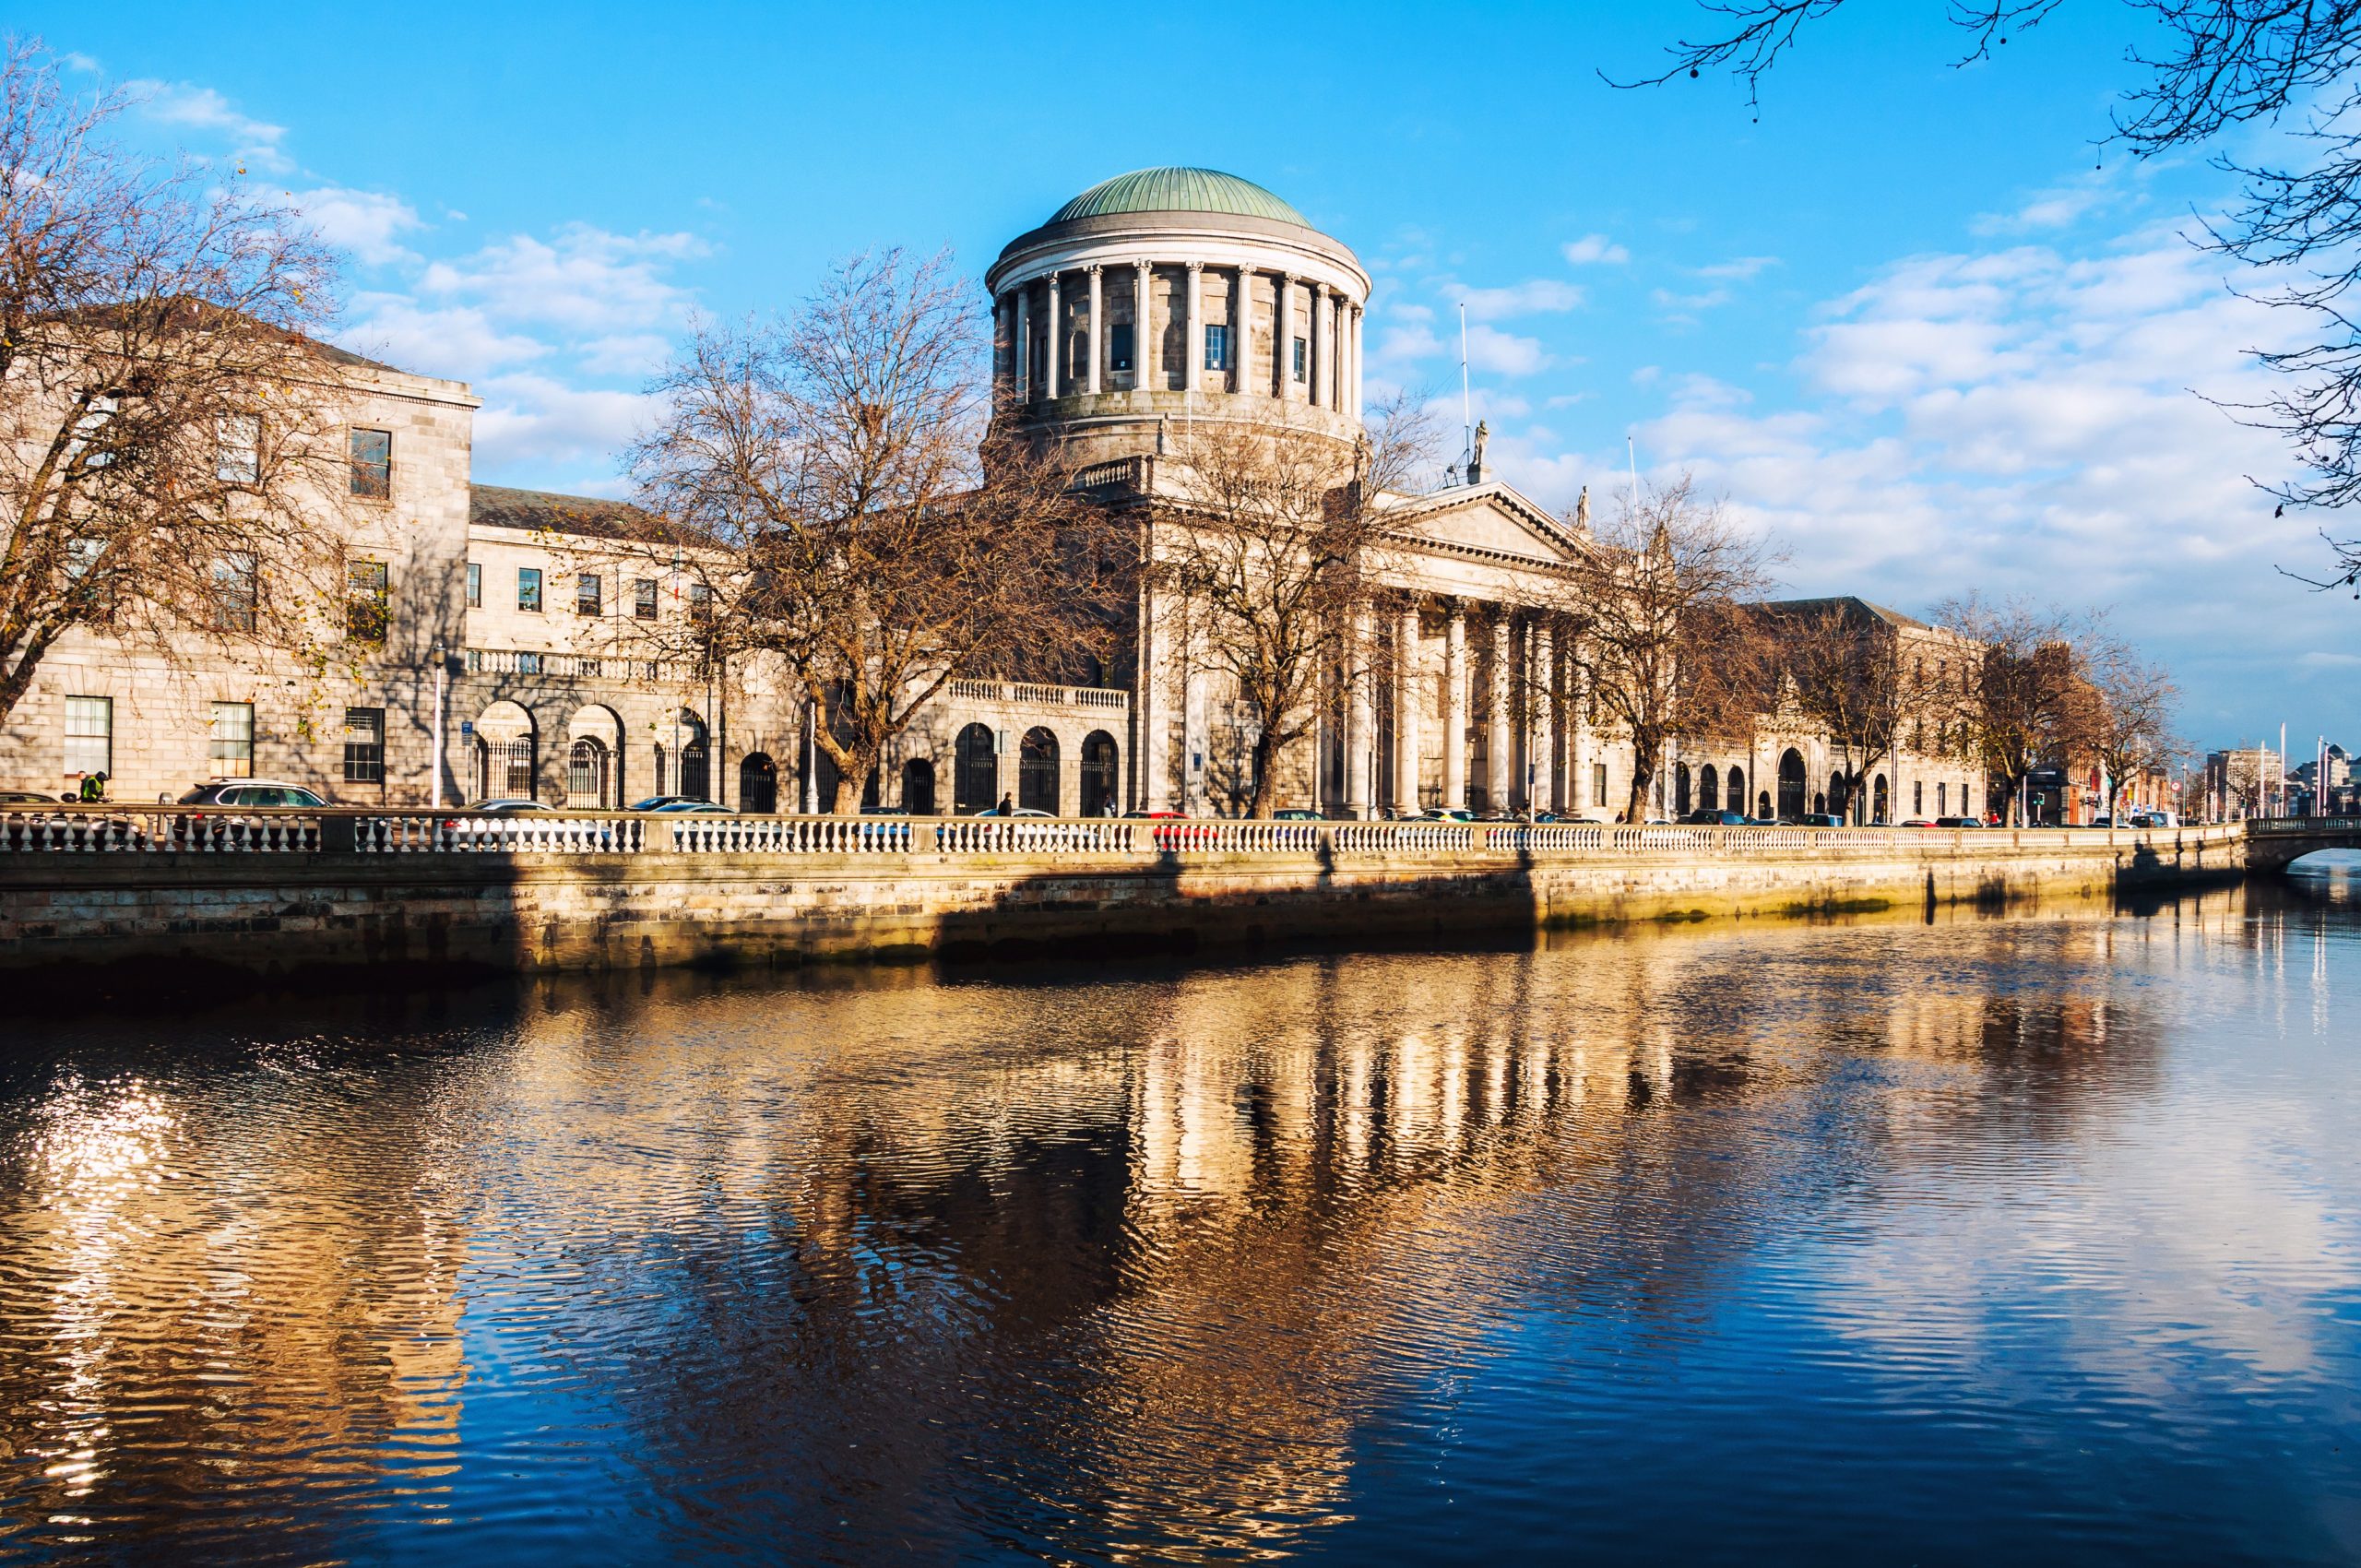 Building with classical architecture with Corinthian Columns and Dome on top. River with building reflection on the forefront.